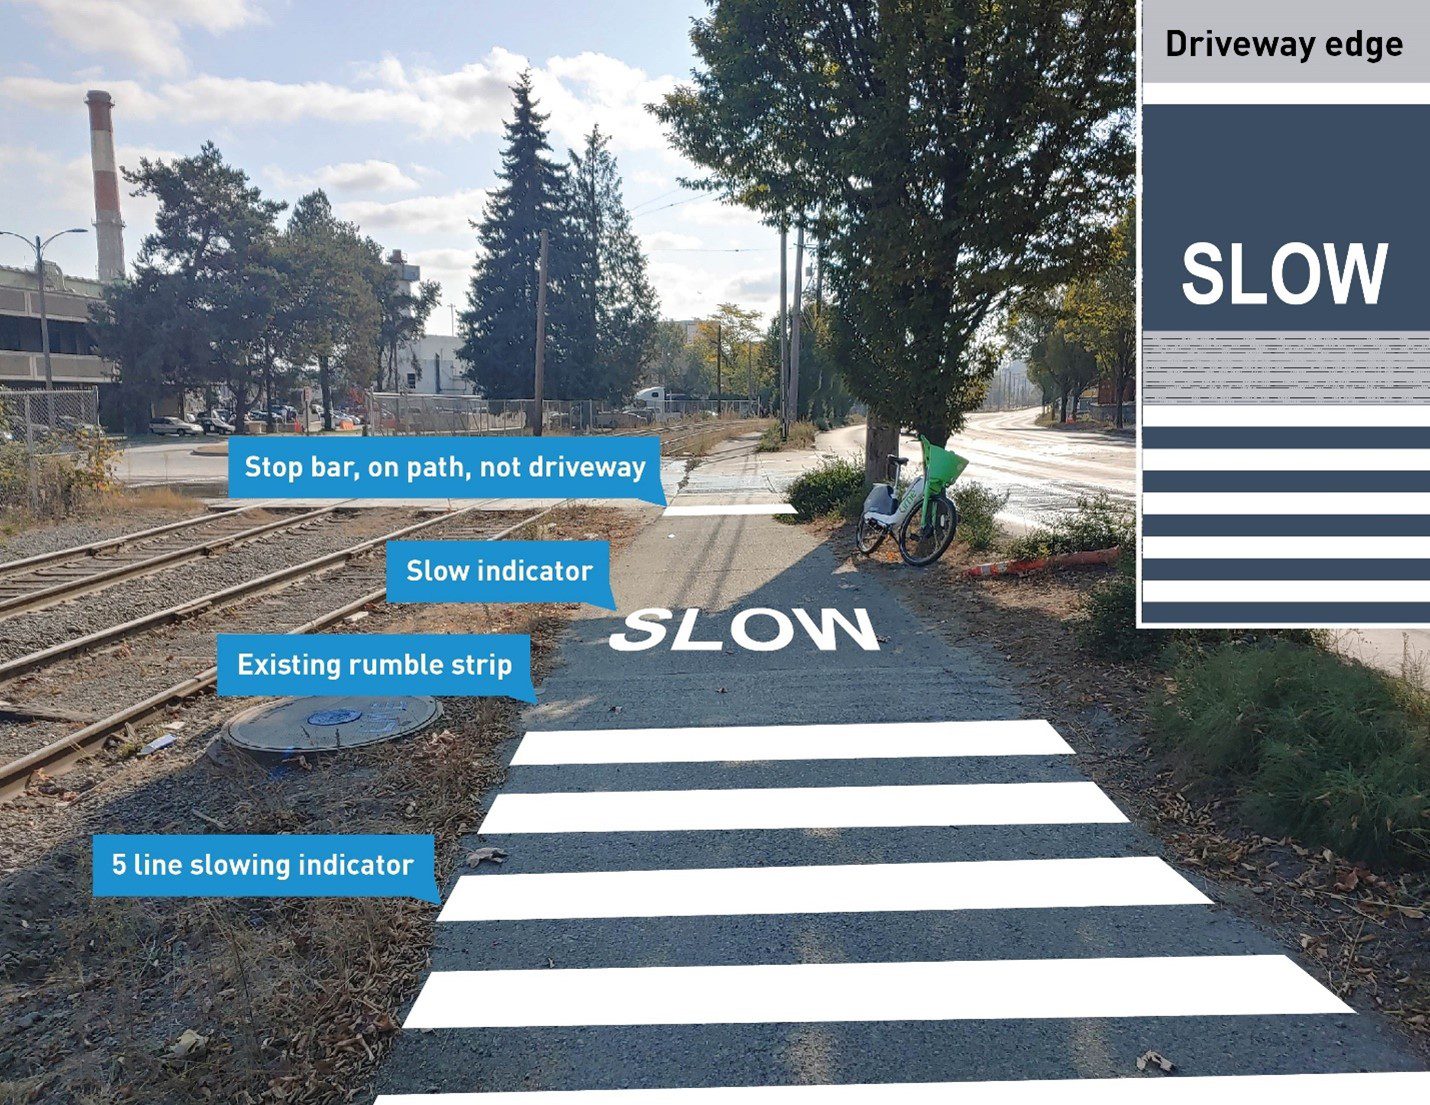 Picture of a trail next to a street and railroad track. White lines are on the trail with the word SLOW in bright white lettering. Blue call-out boxes show the locations of stop bars on path, slow indicator, existing rumble strip, and 5 line slowing indicator. The word driveway edge is in the upper right corner.